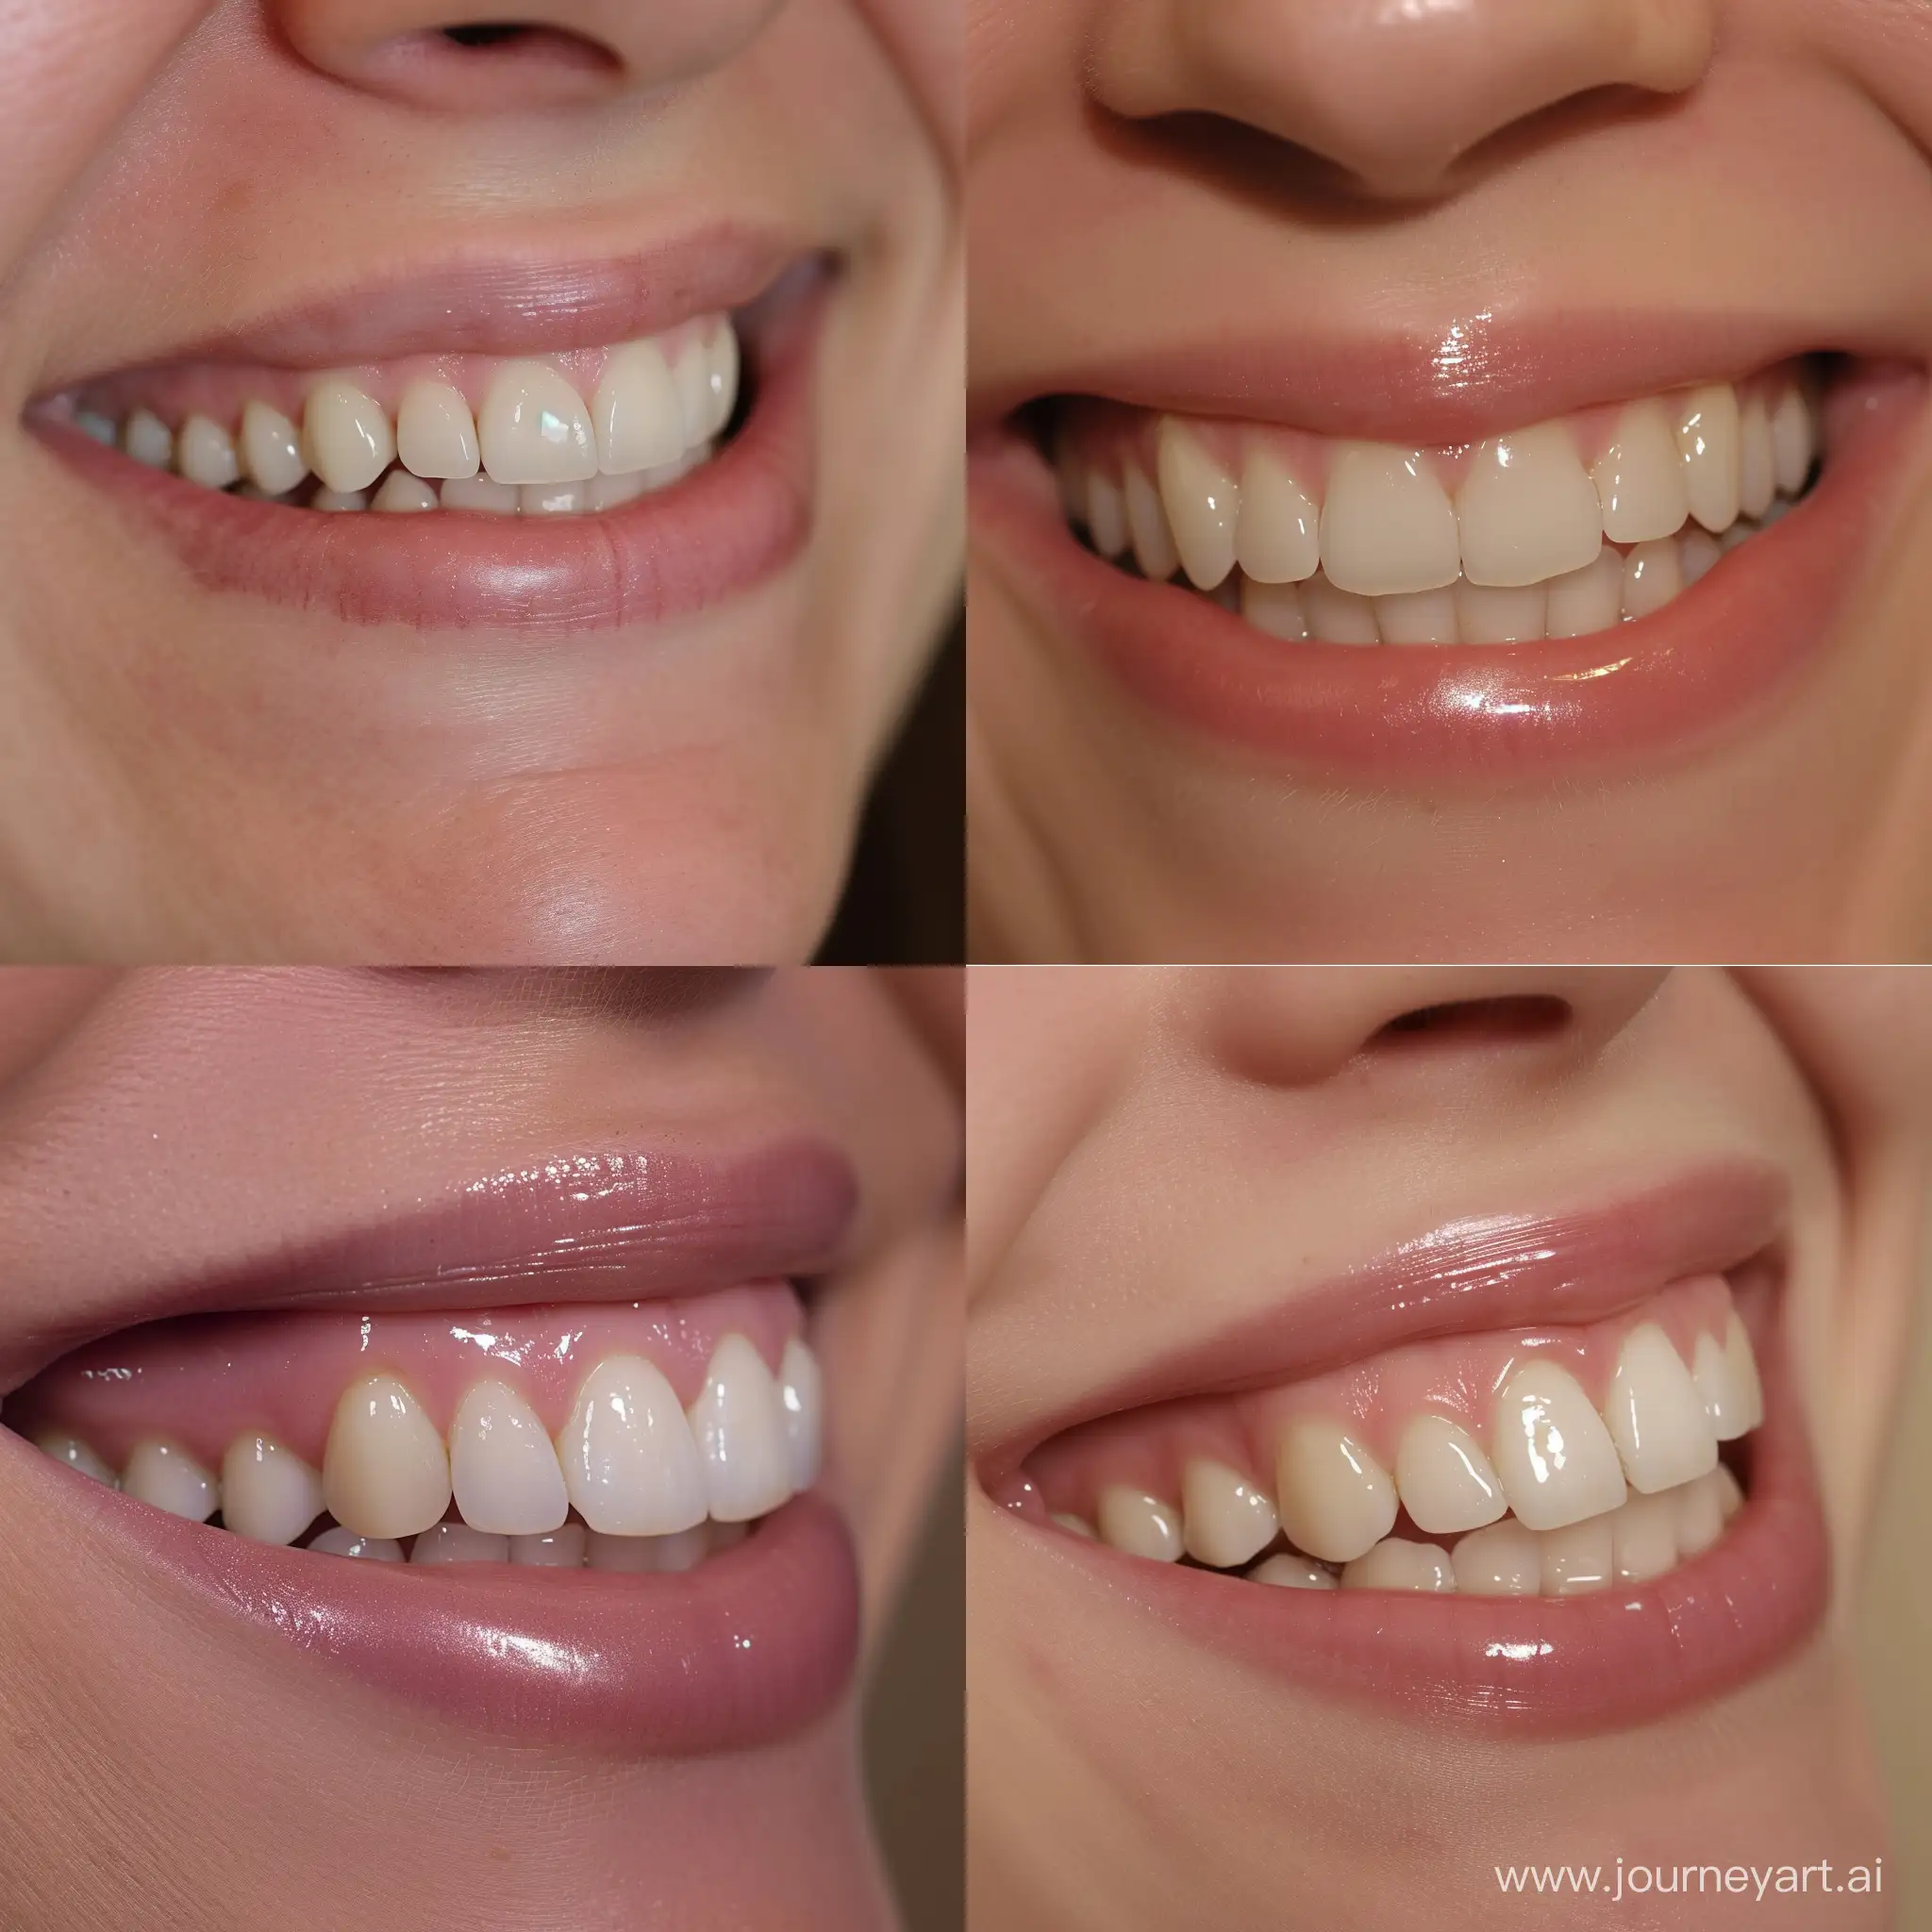 Transformation-with-Dental-Implants-Before-and-After-Smiles